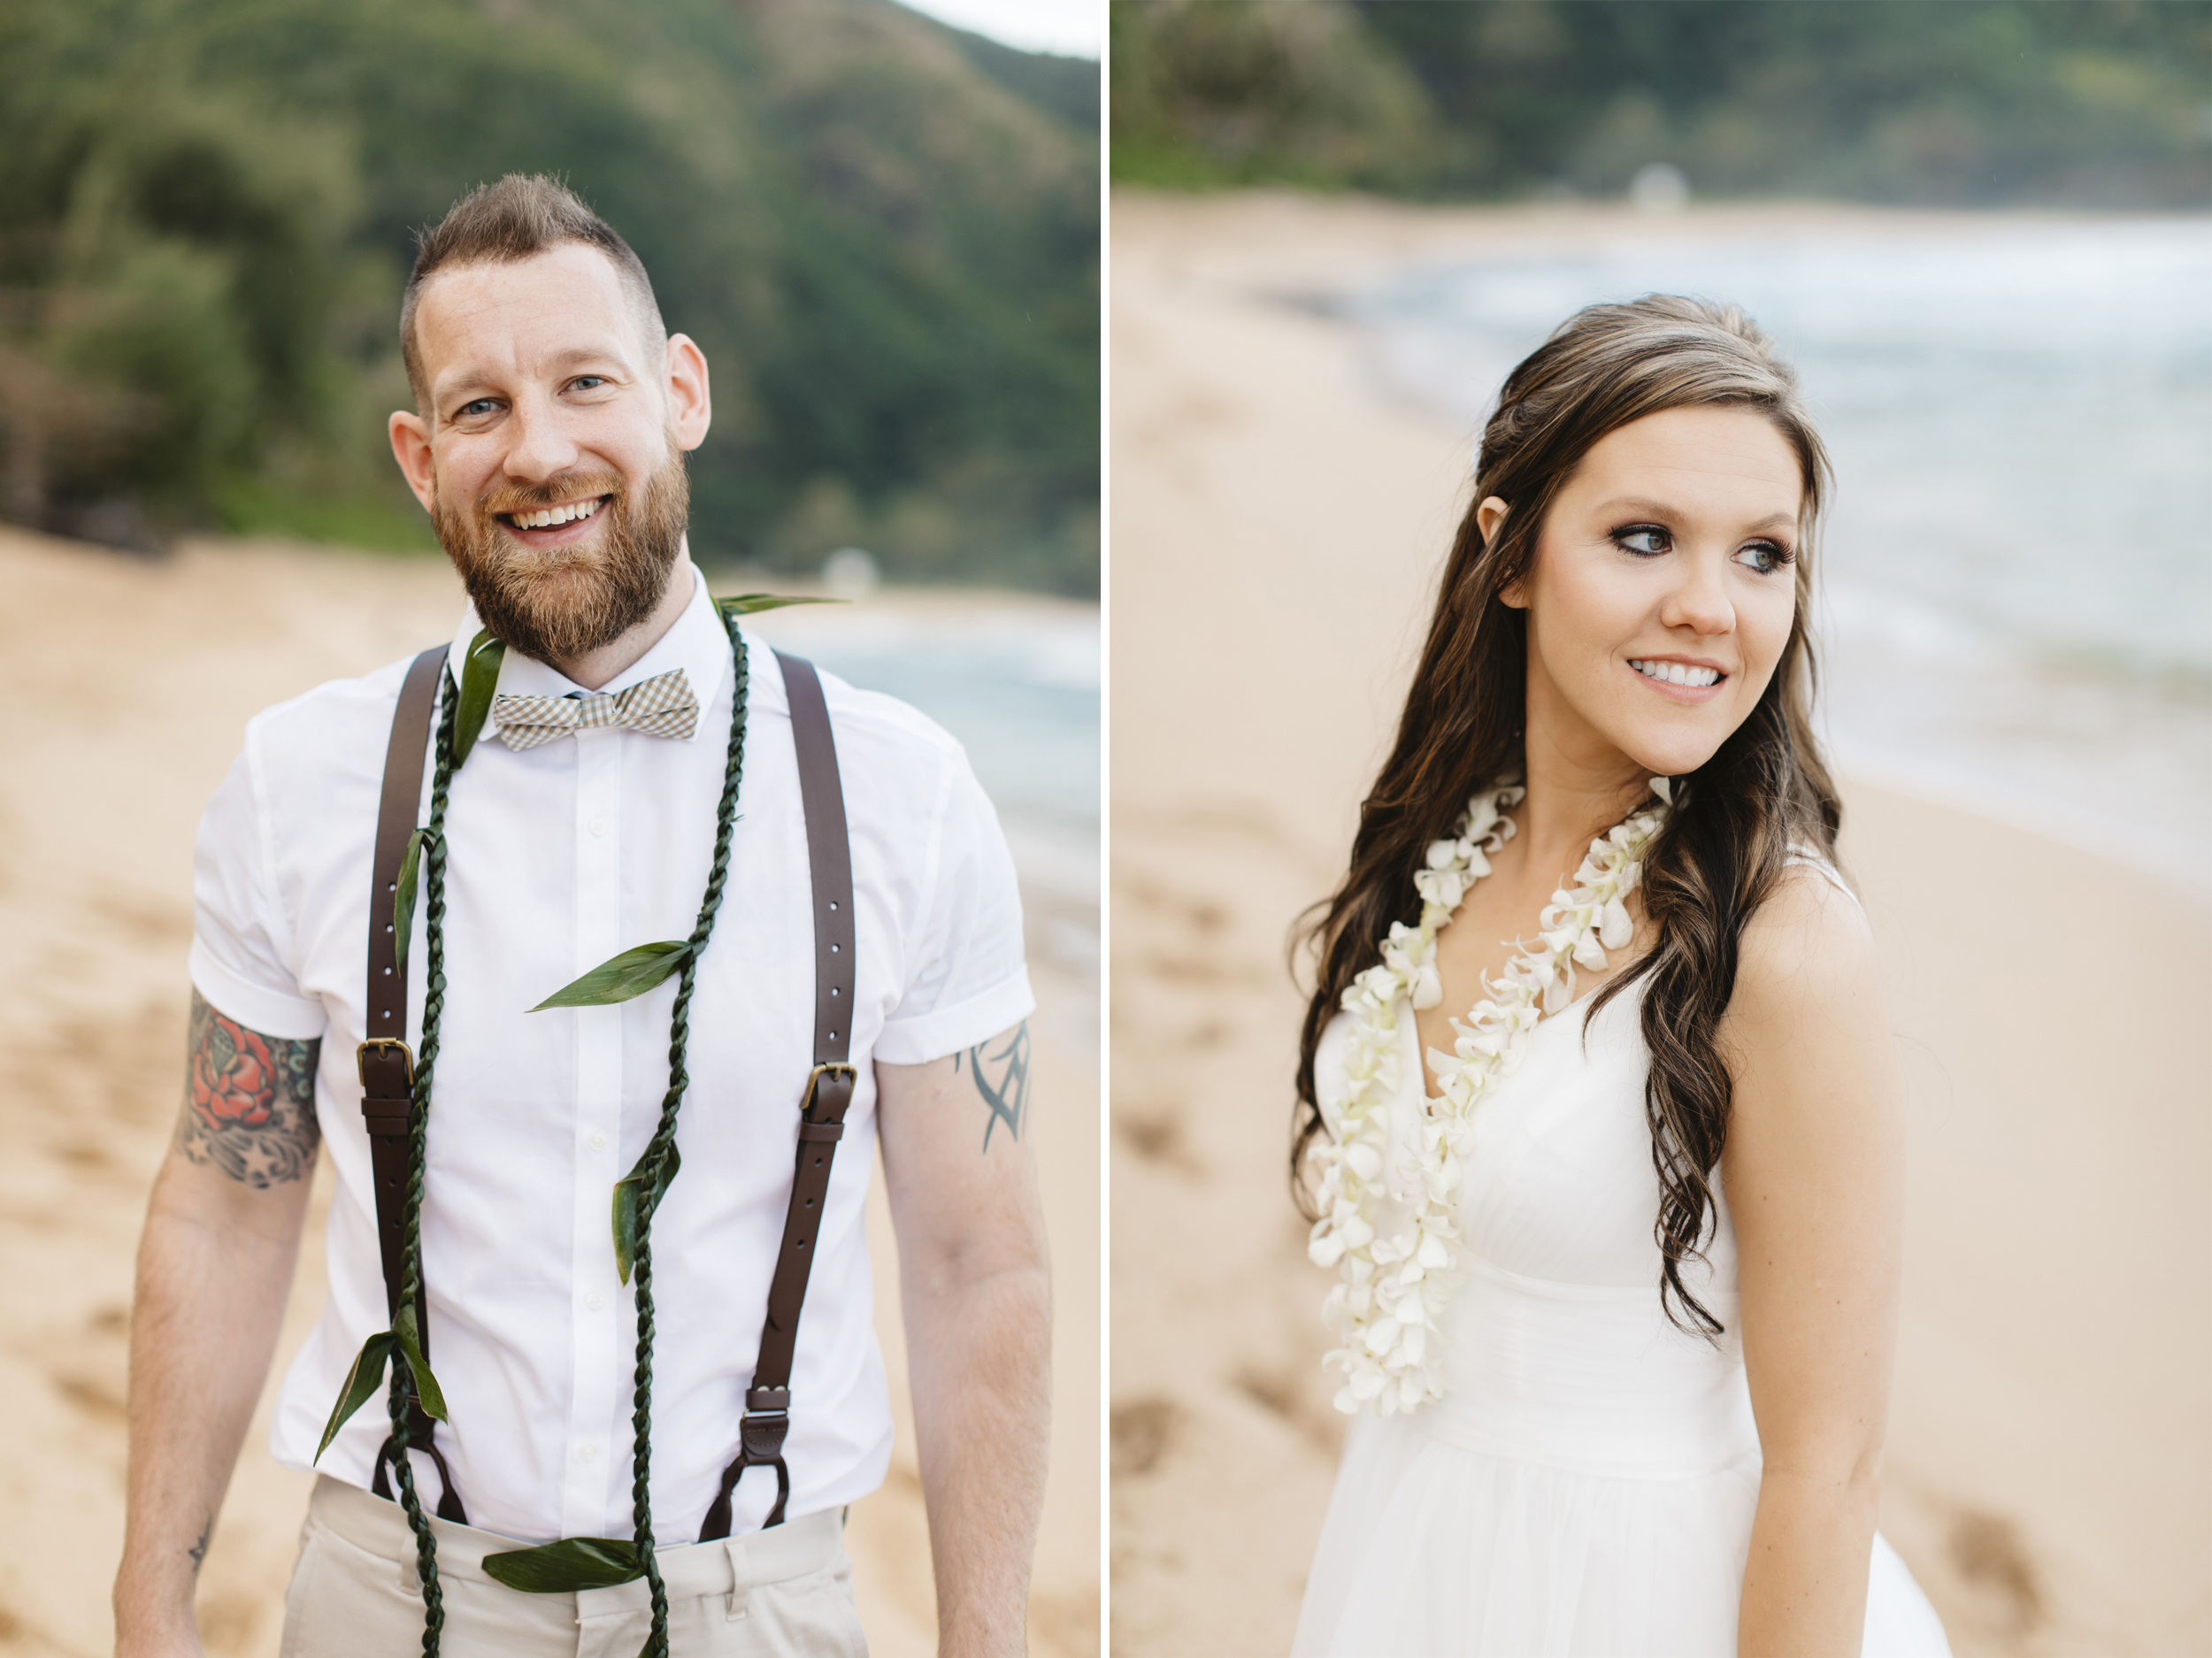 Portrait of a bride and groom after Tunnels beach wedding ceremony by Kauai Elopement photographers Colby and Jess